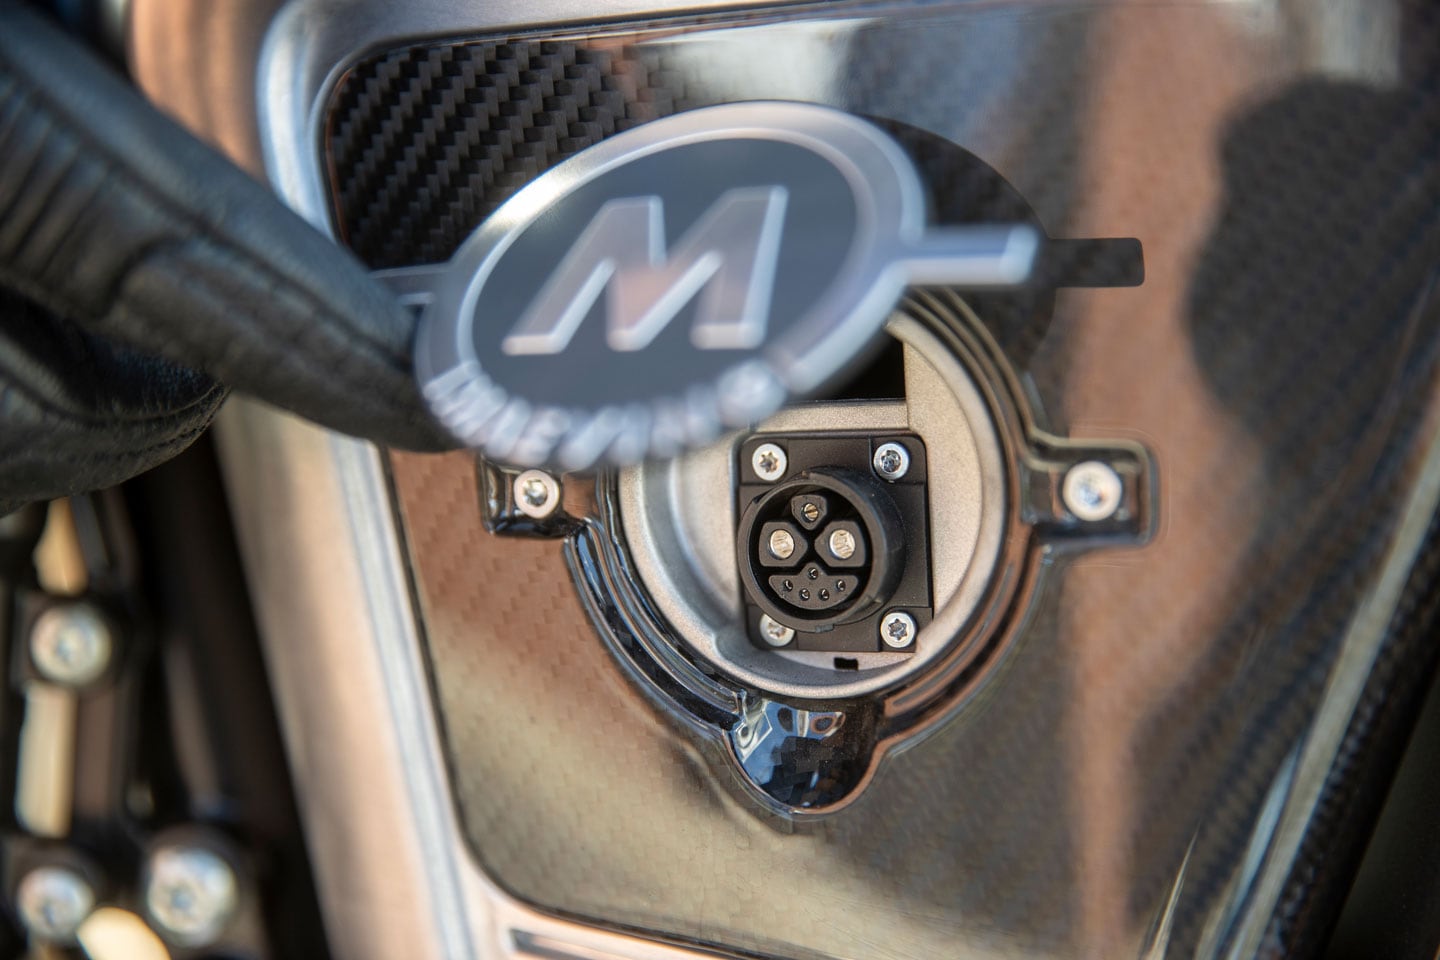 RM1S can be charged with batteries in the bike by plugging directly into this port on the rearward compartment.